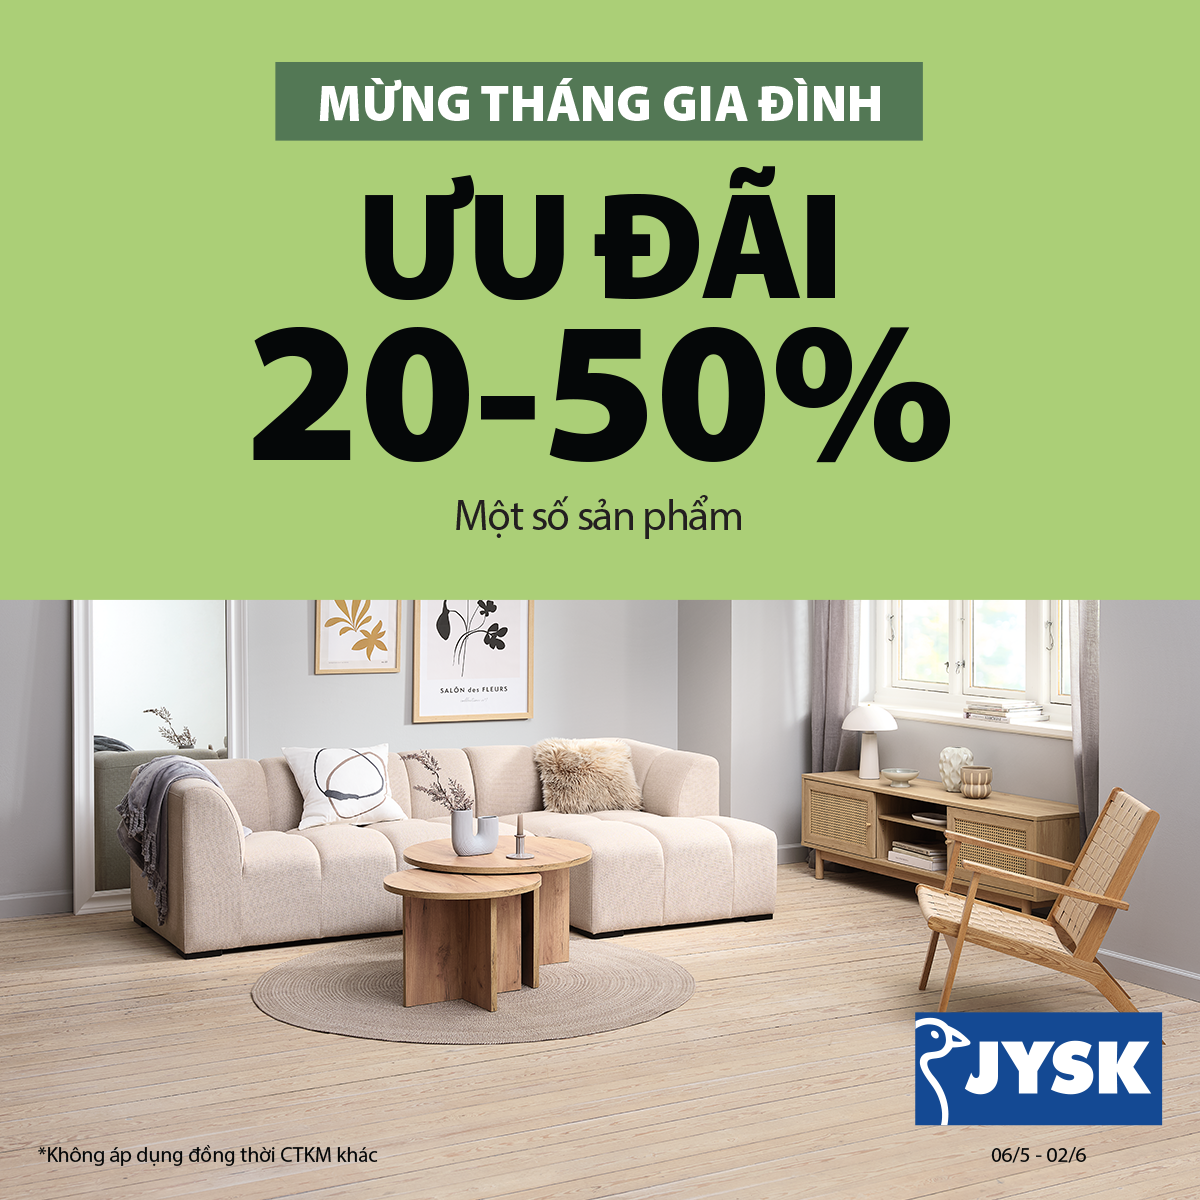 HAPPY FAMILY’S MONTH - JYSK DISCOUNT 20% - 50%